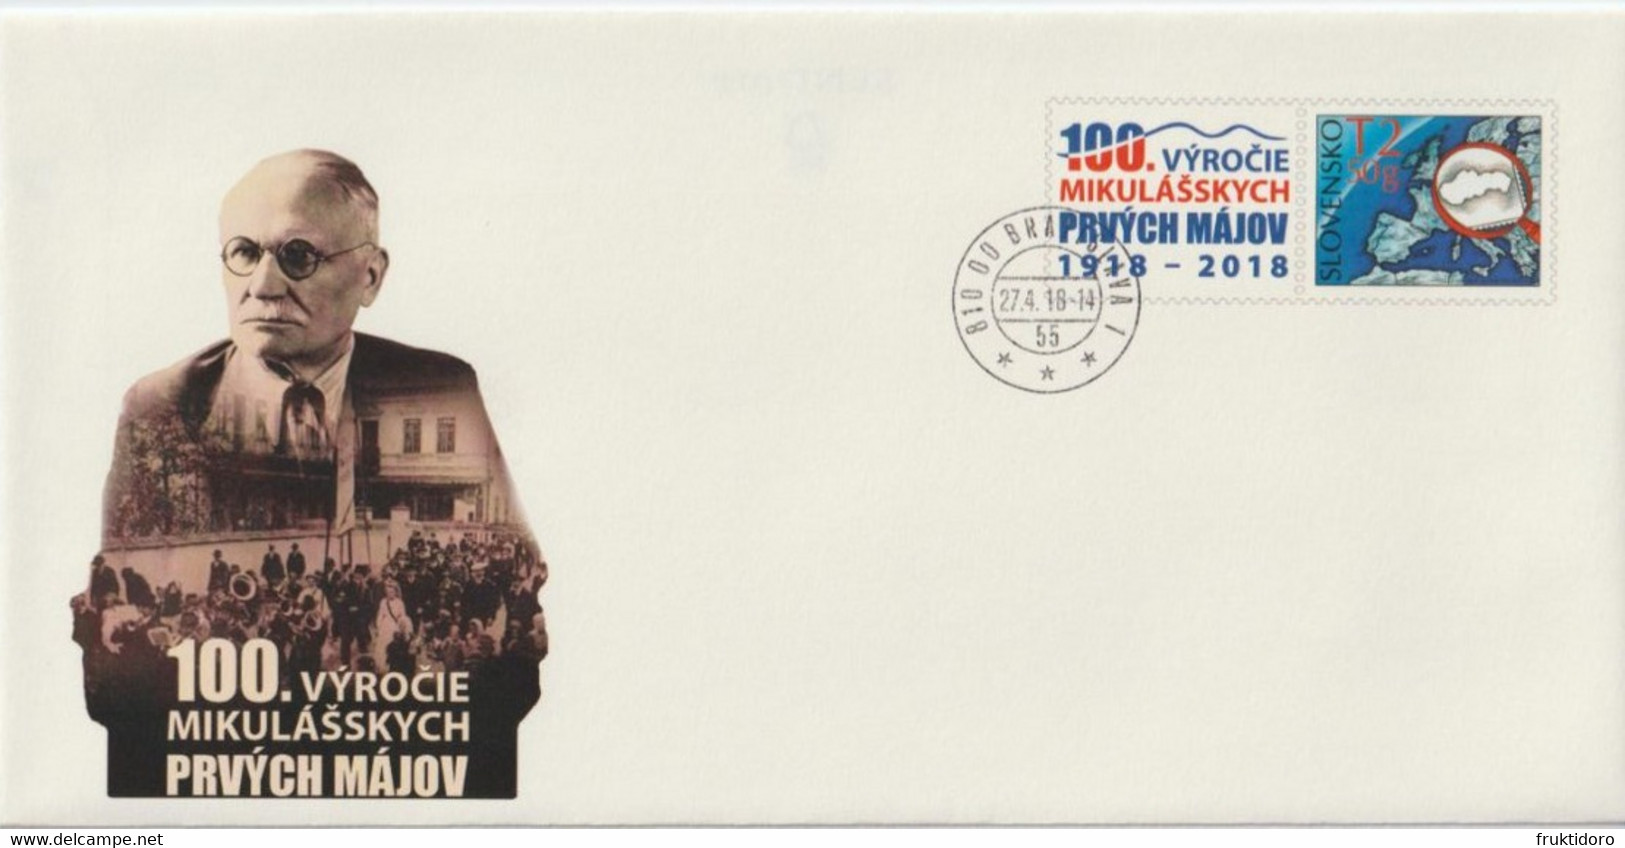 Slovakia Postal Stationery - 100th Anniversary Of The May 1st In L. Mikuláš - 2018 - Map - Magnifying Glass - Sobres